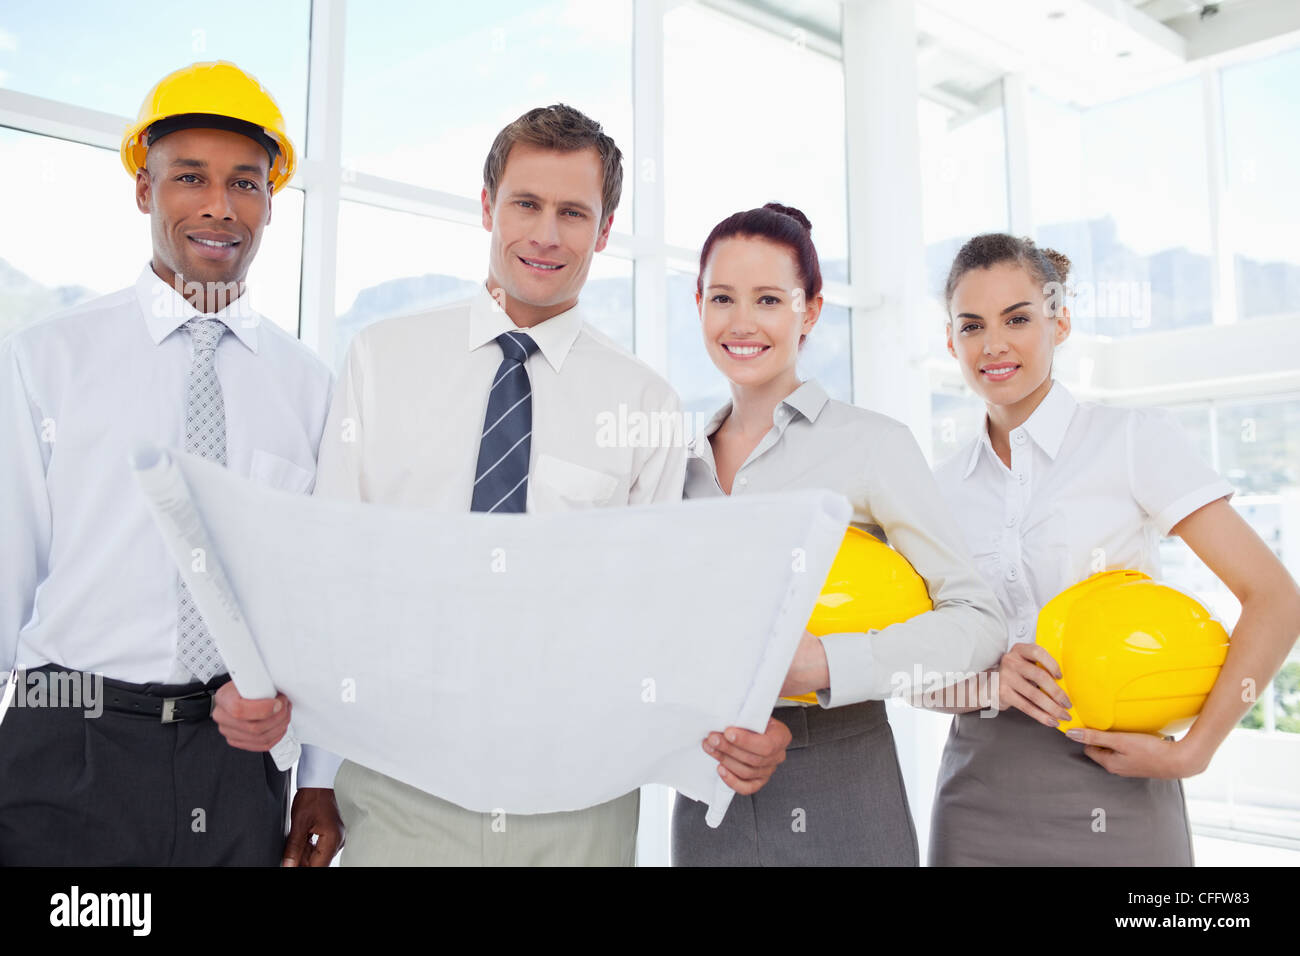 Smiling architects together with a blueprint Stock Photo